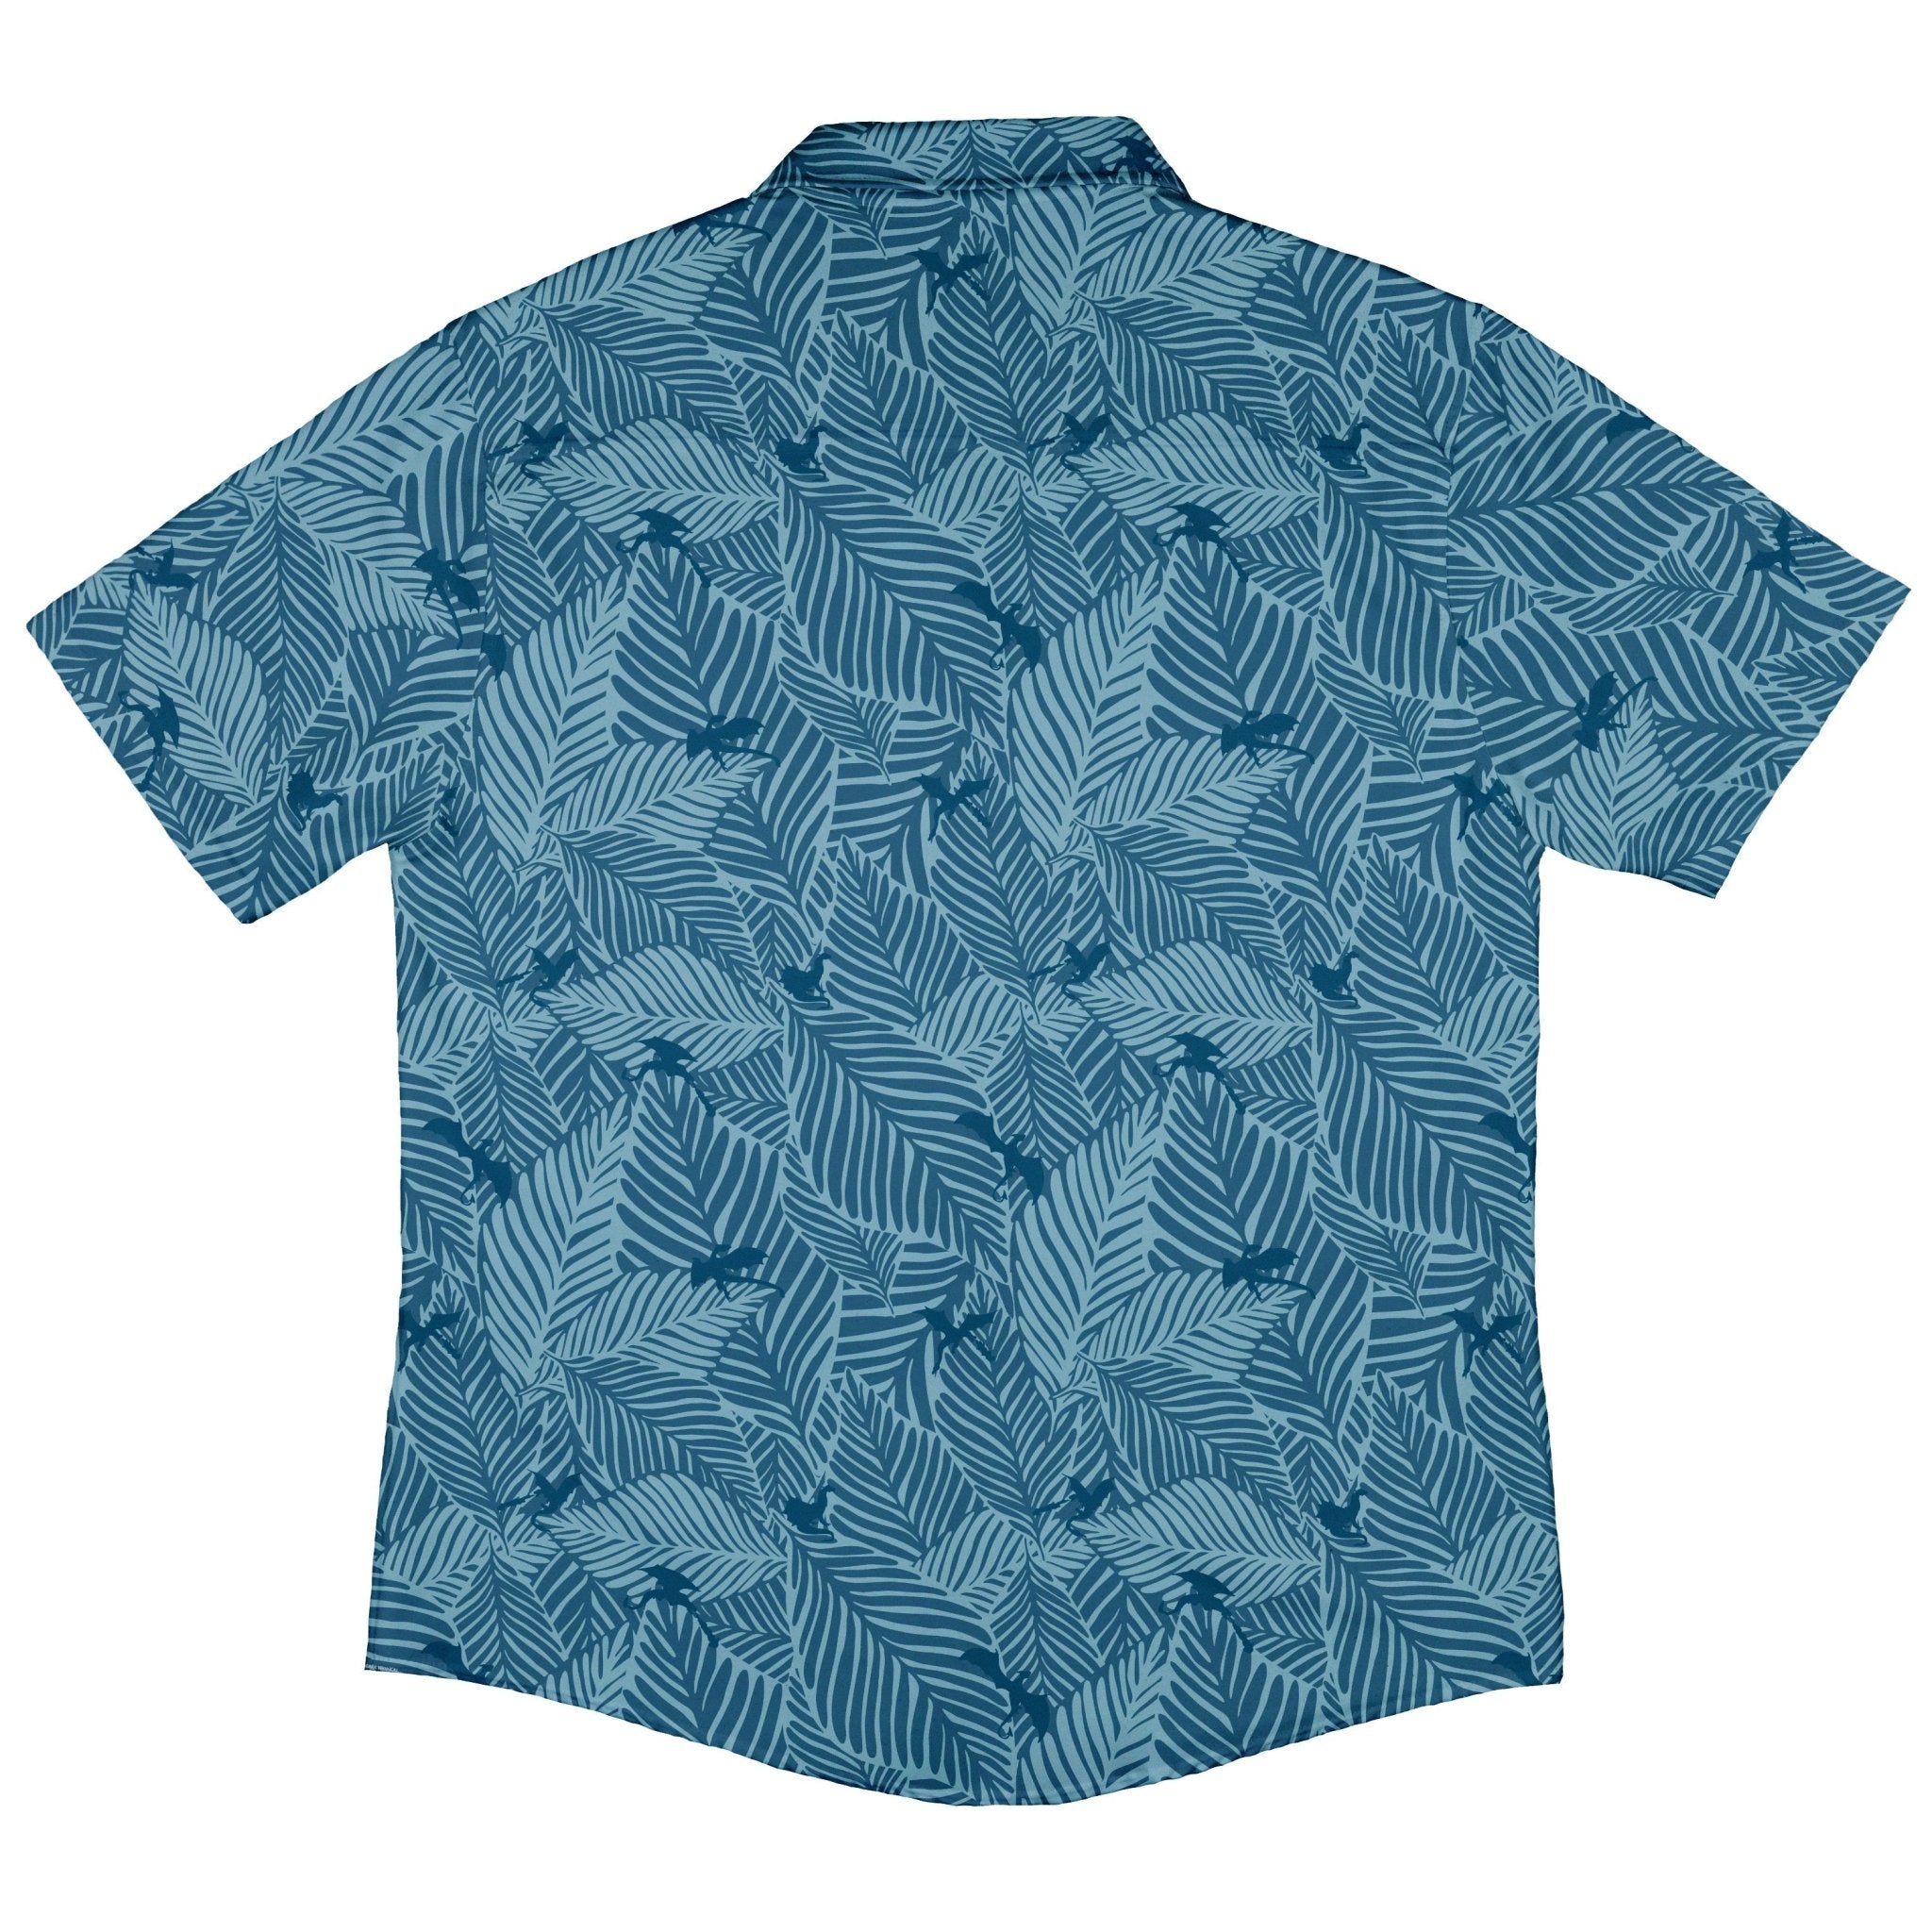 Tropical Dragons Button Up Shirt - adult sizing - Design by Dunking Toast - dnd & rpg print